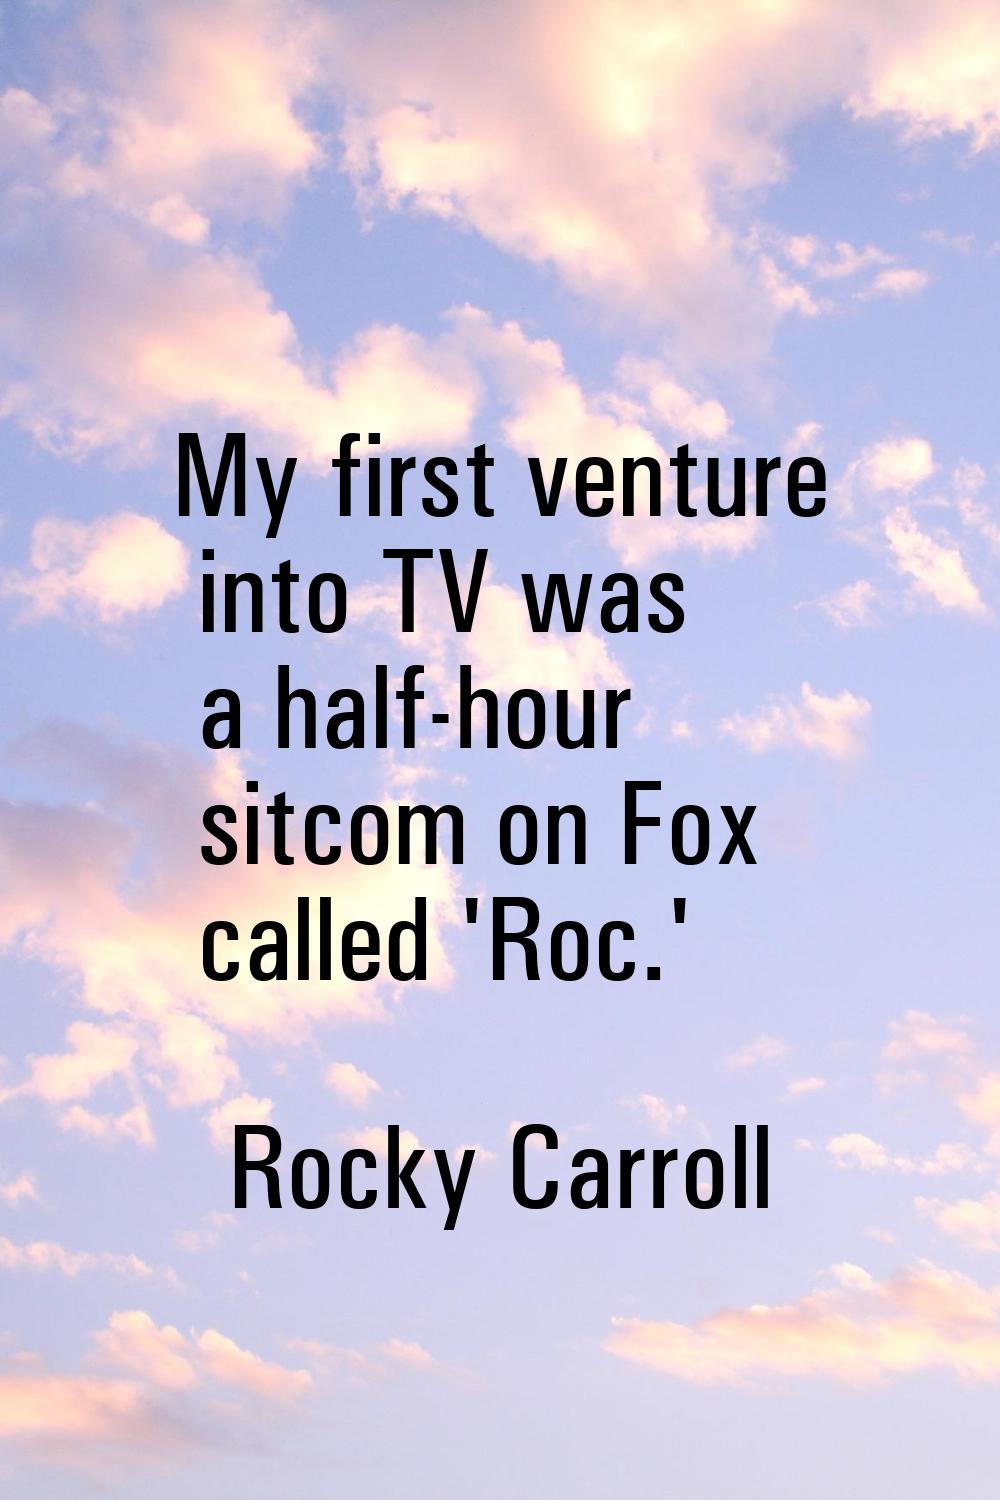 My first venture into TV was a half-hour sitcom on Fox called 'Roc.'